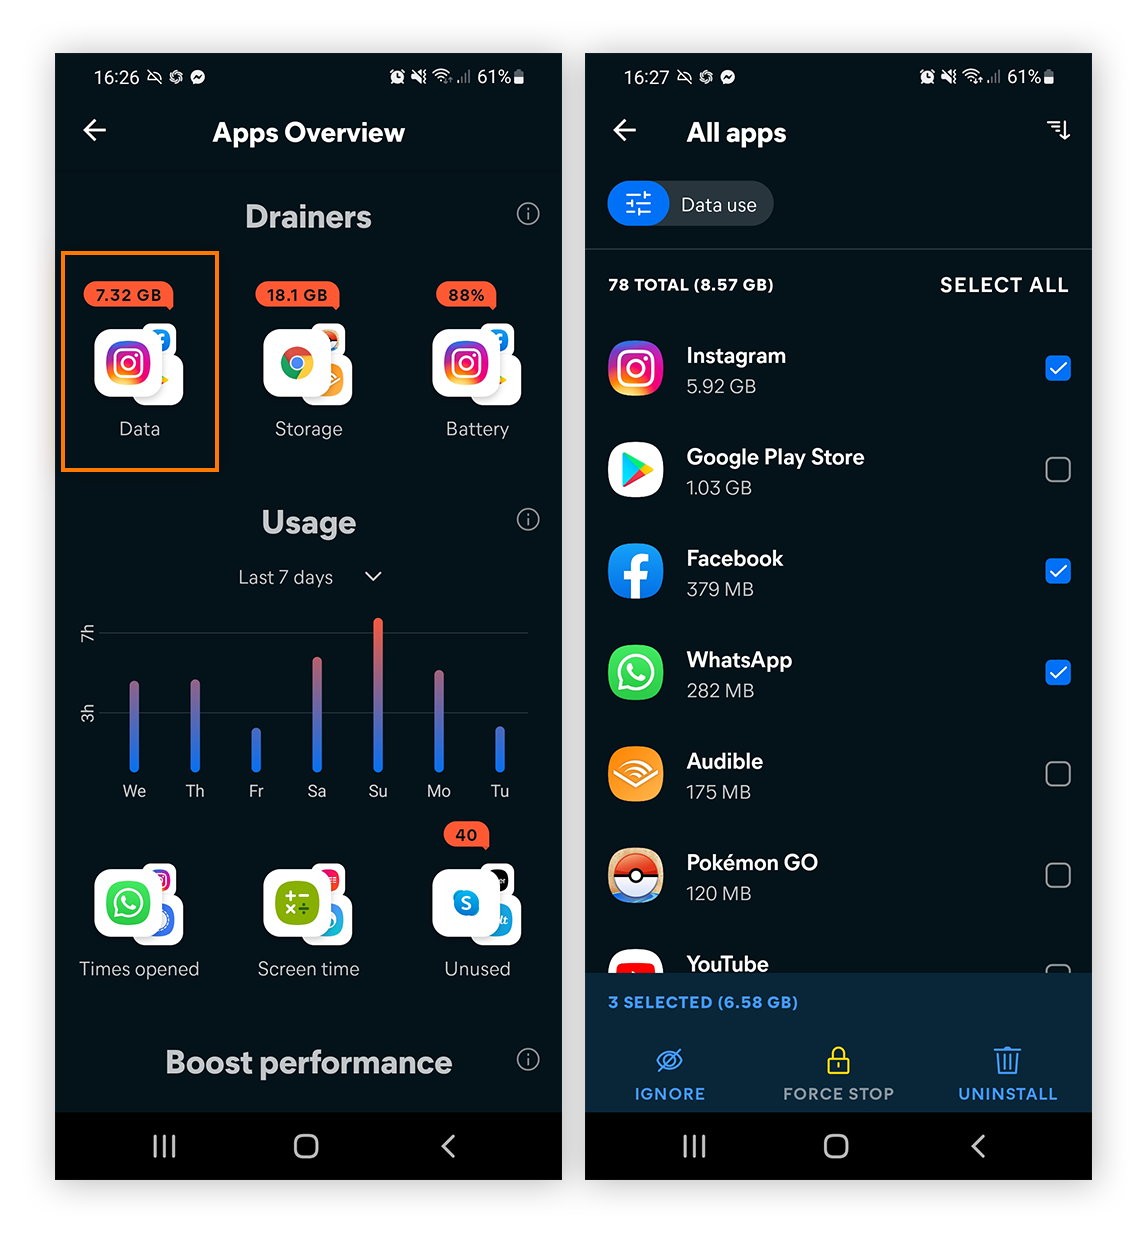 Avast Cleanup for Android shows and overview of data-draining and resource-draining apps.